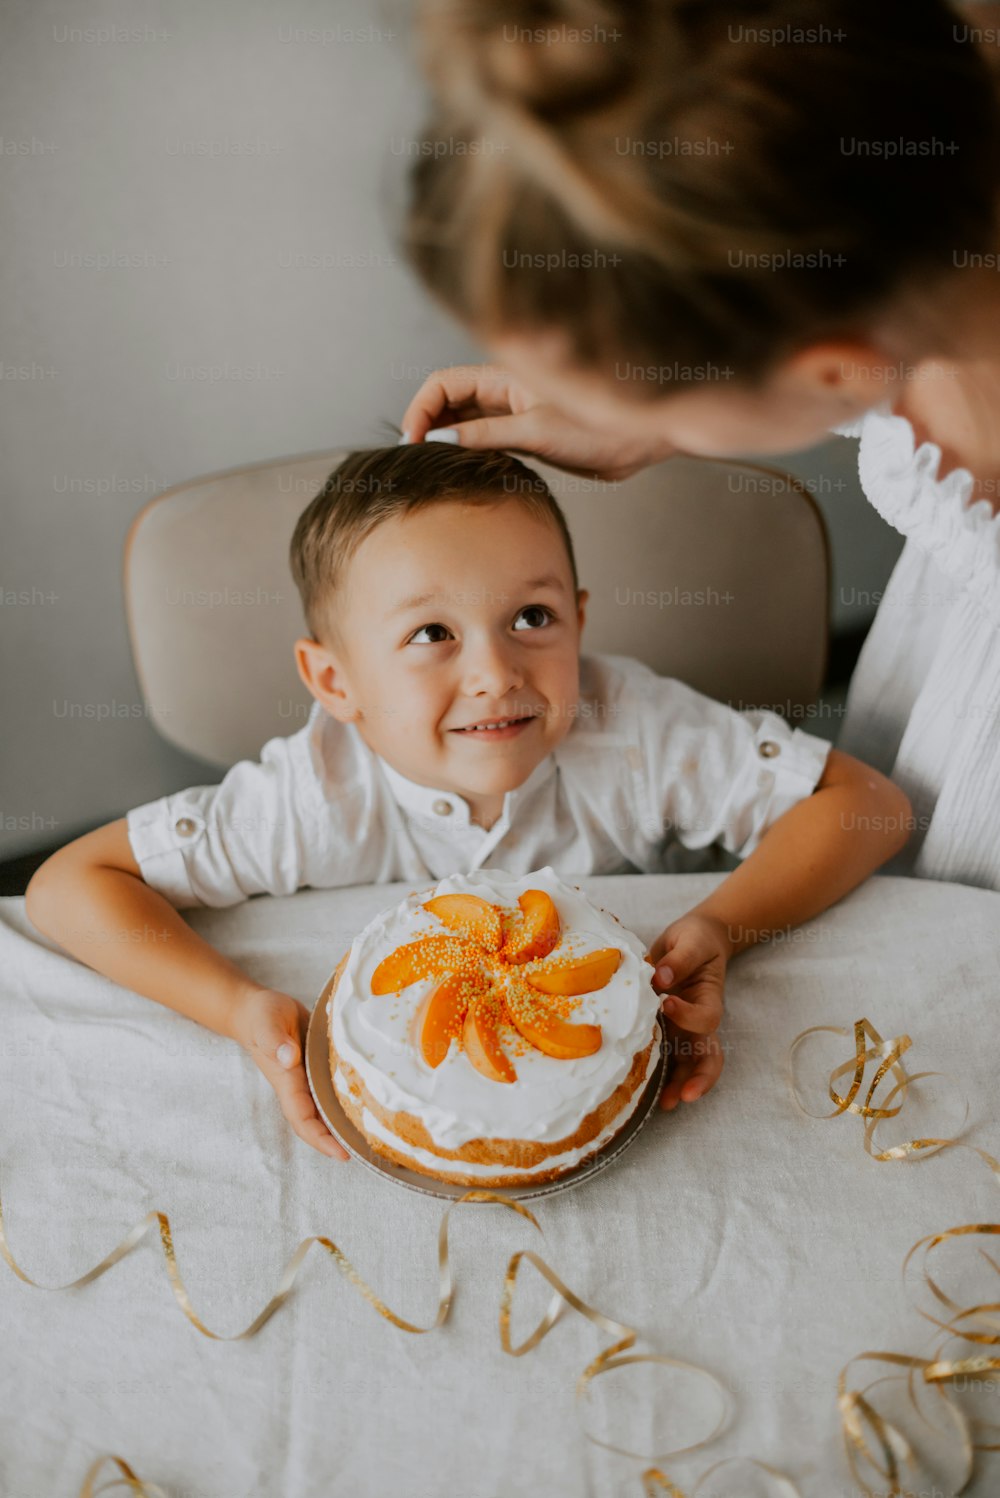 a little boy sitting at a table with a cake